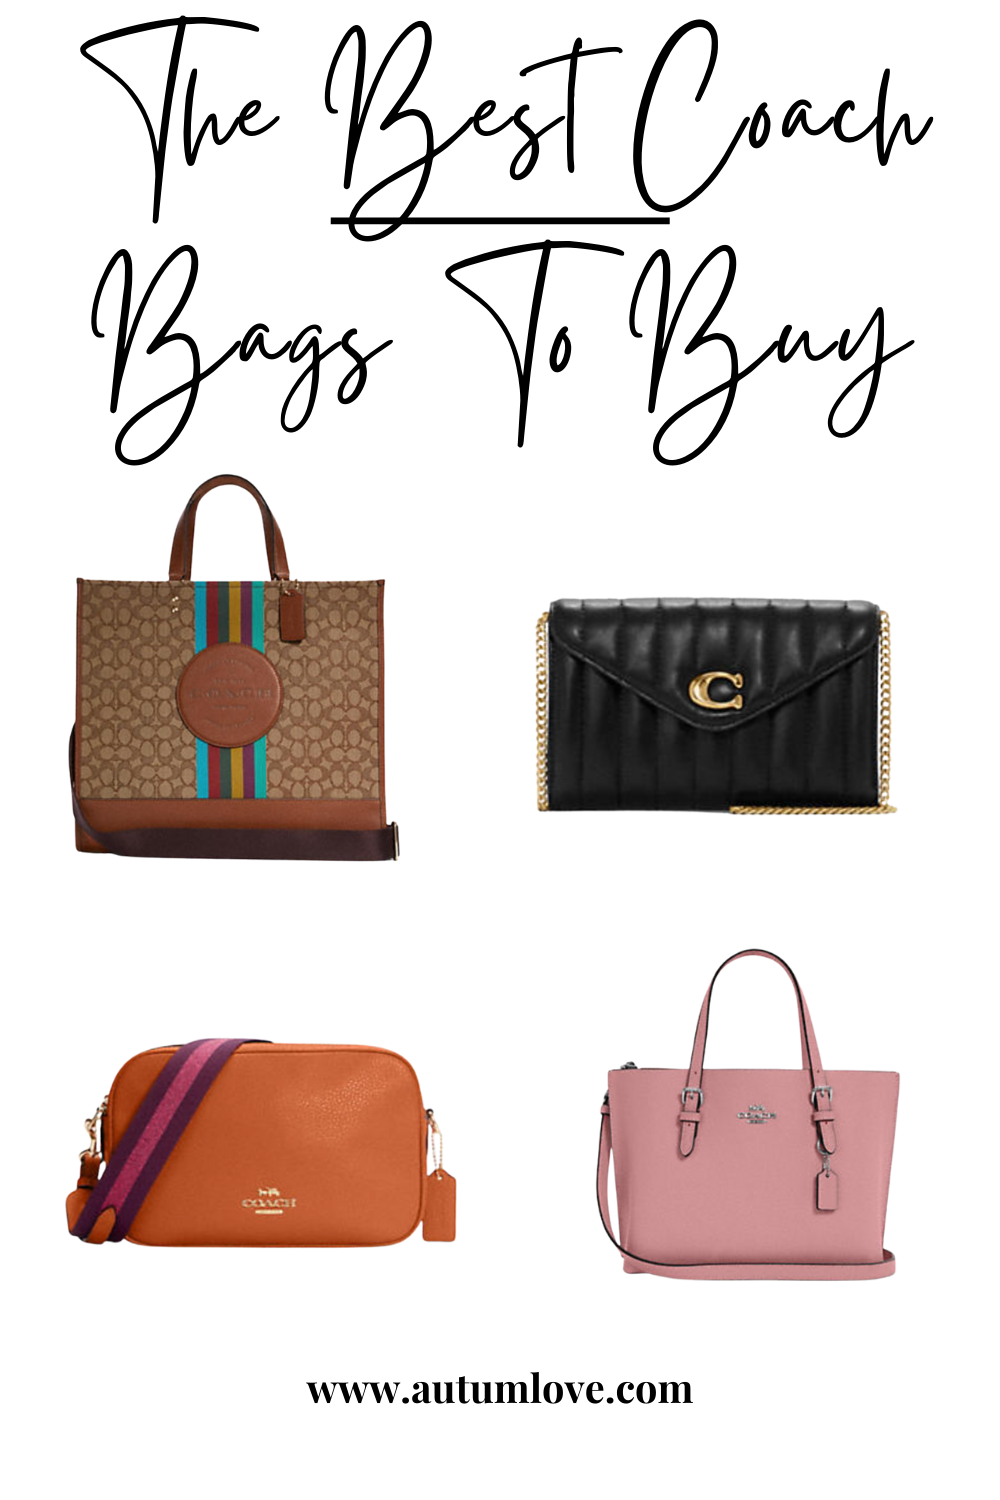 Coach Is Making A Comeback Here are The Best Coach Handbags To Buy This  Season — Autum Love